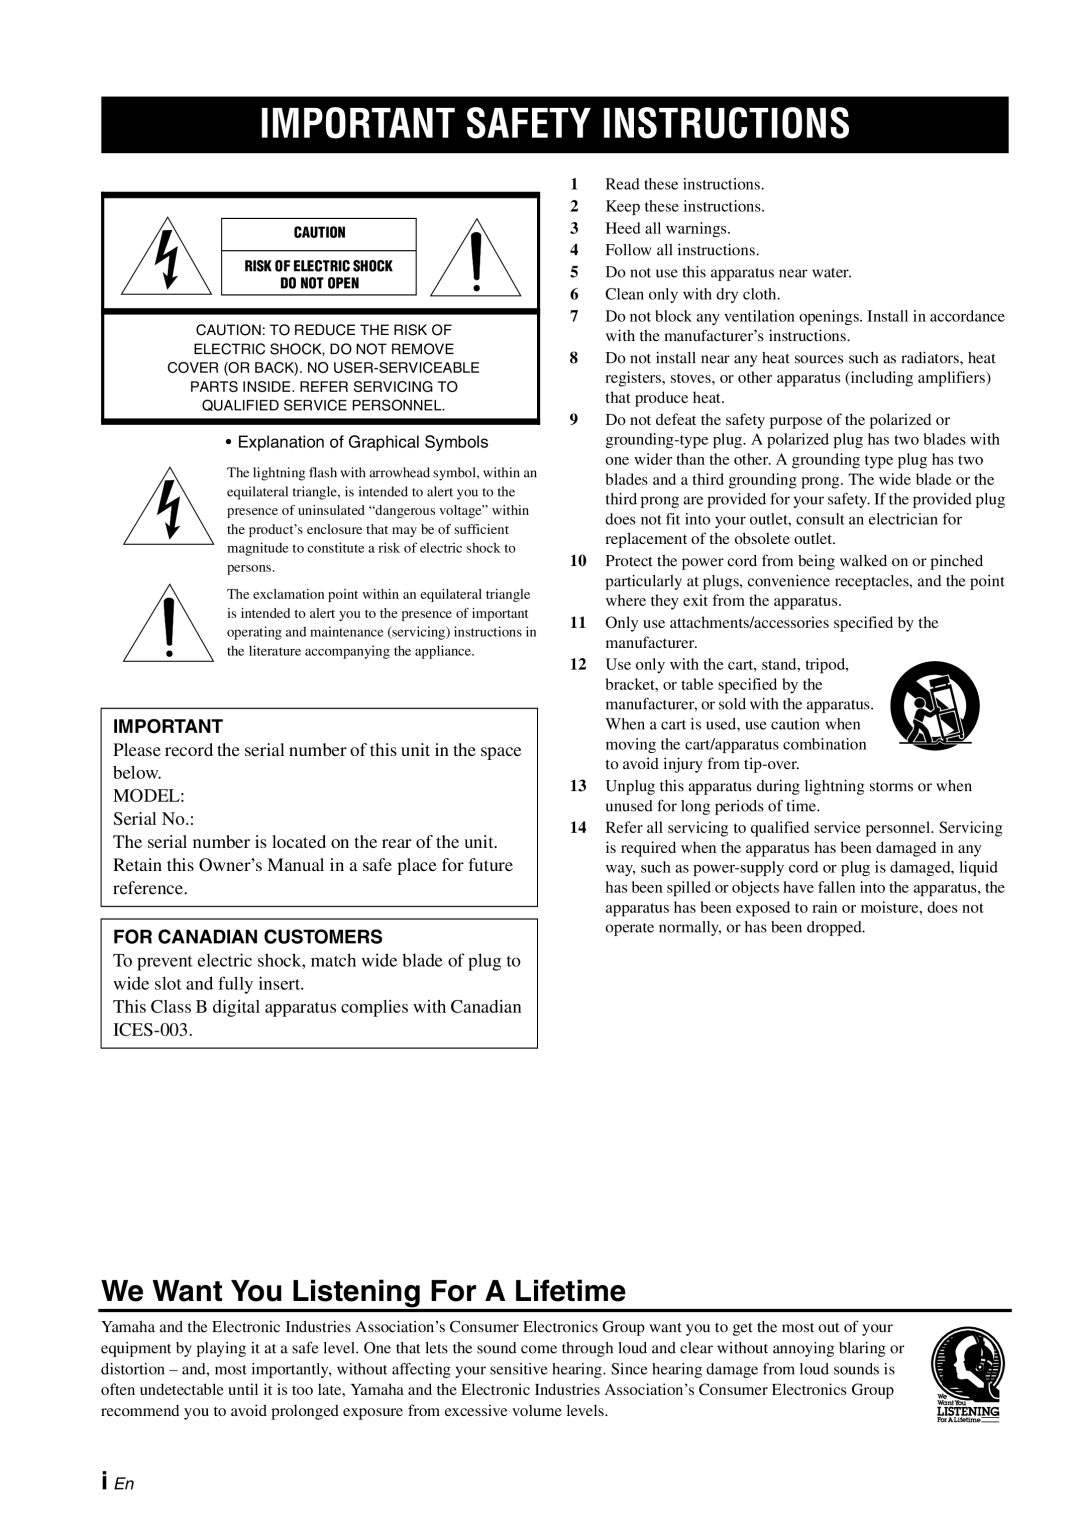 Yamaha CD-S1000 owner manual Important Safety Instructions, We Want You Listening For A Lifetime, i En 